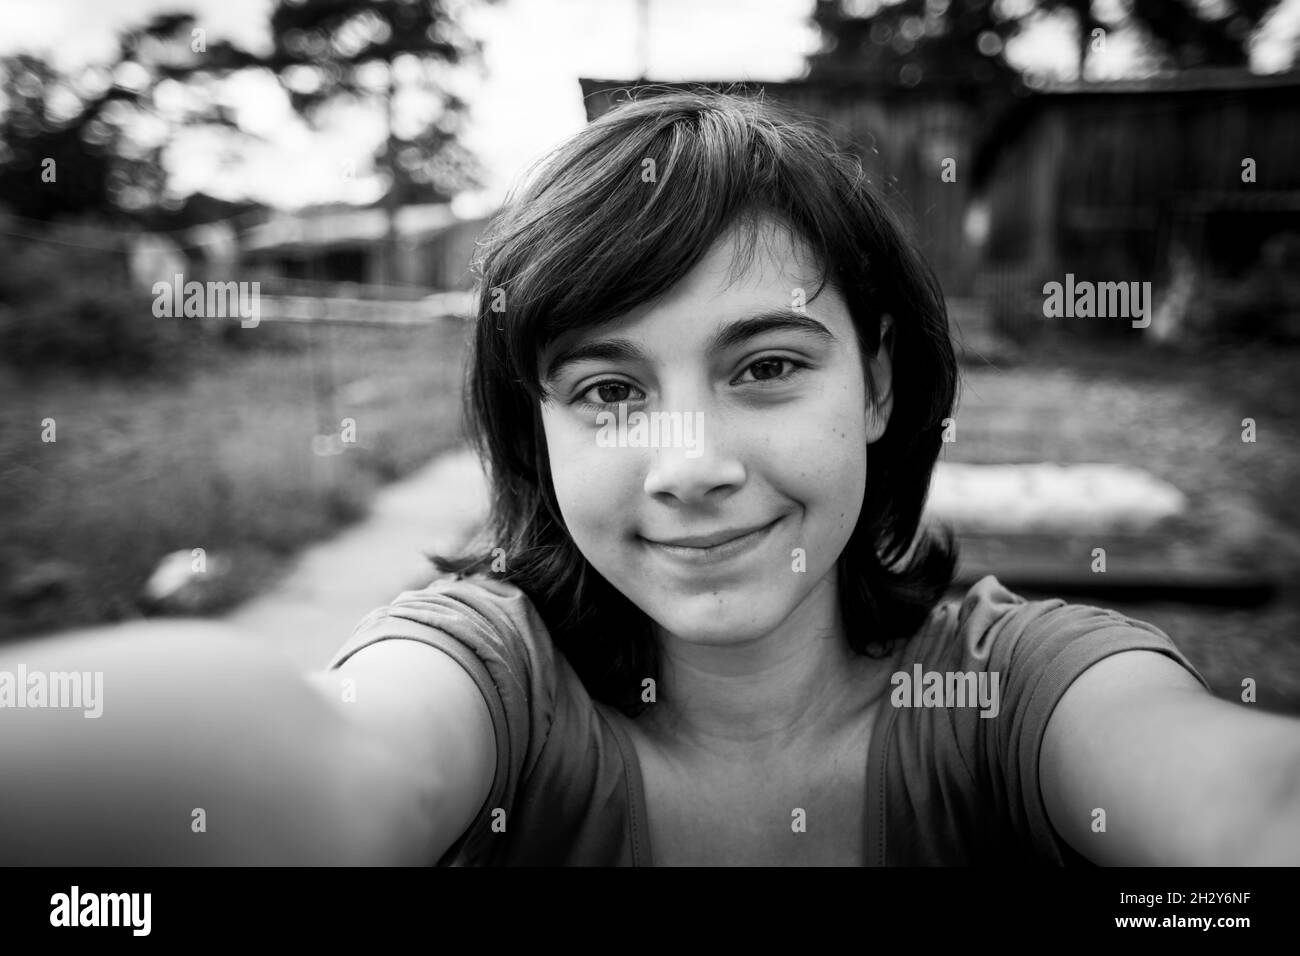 Teenage girl takes a selfie in the village. Black and white photo. Stock Photo